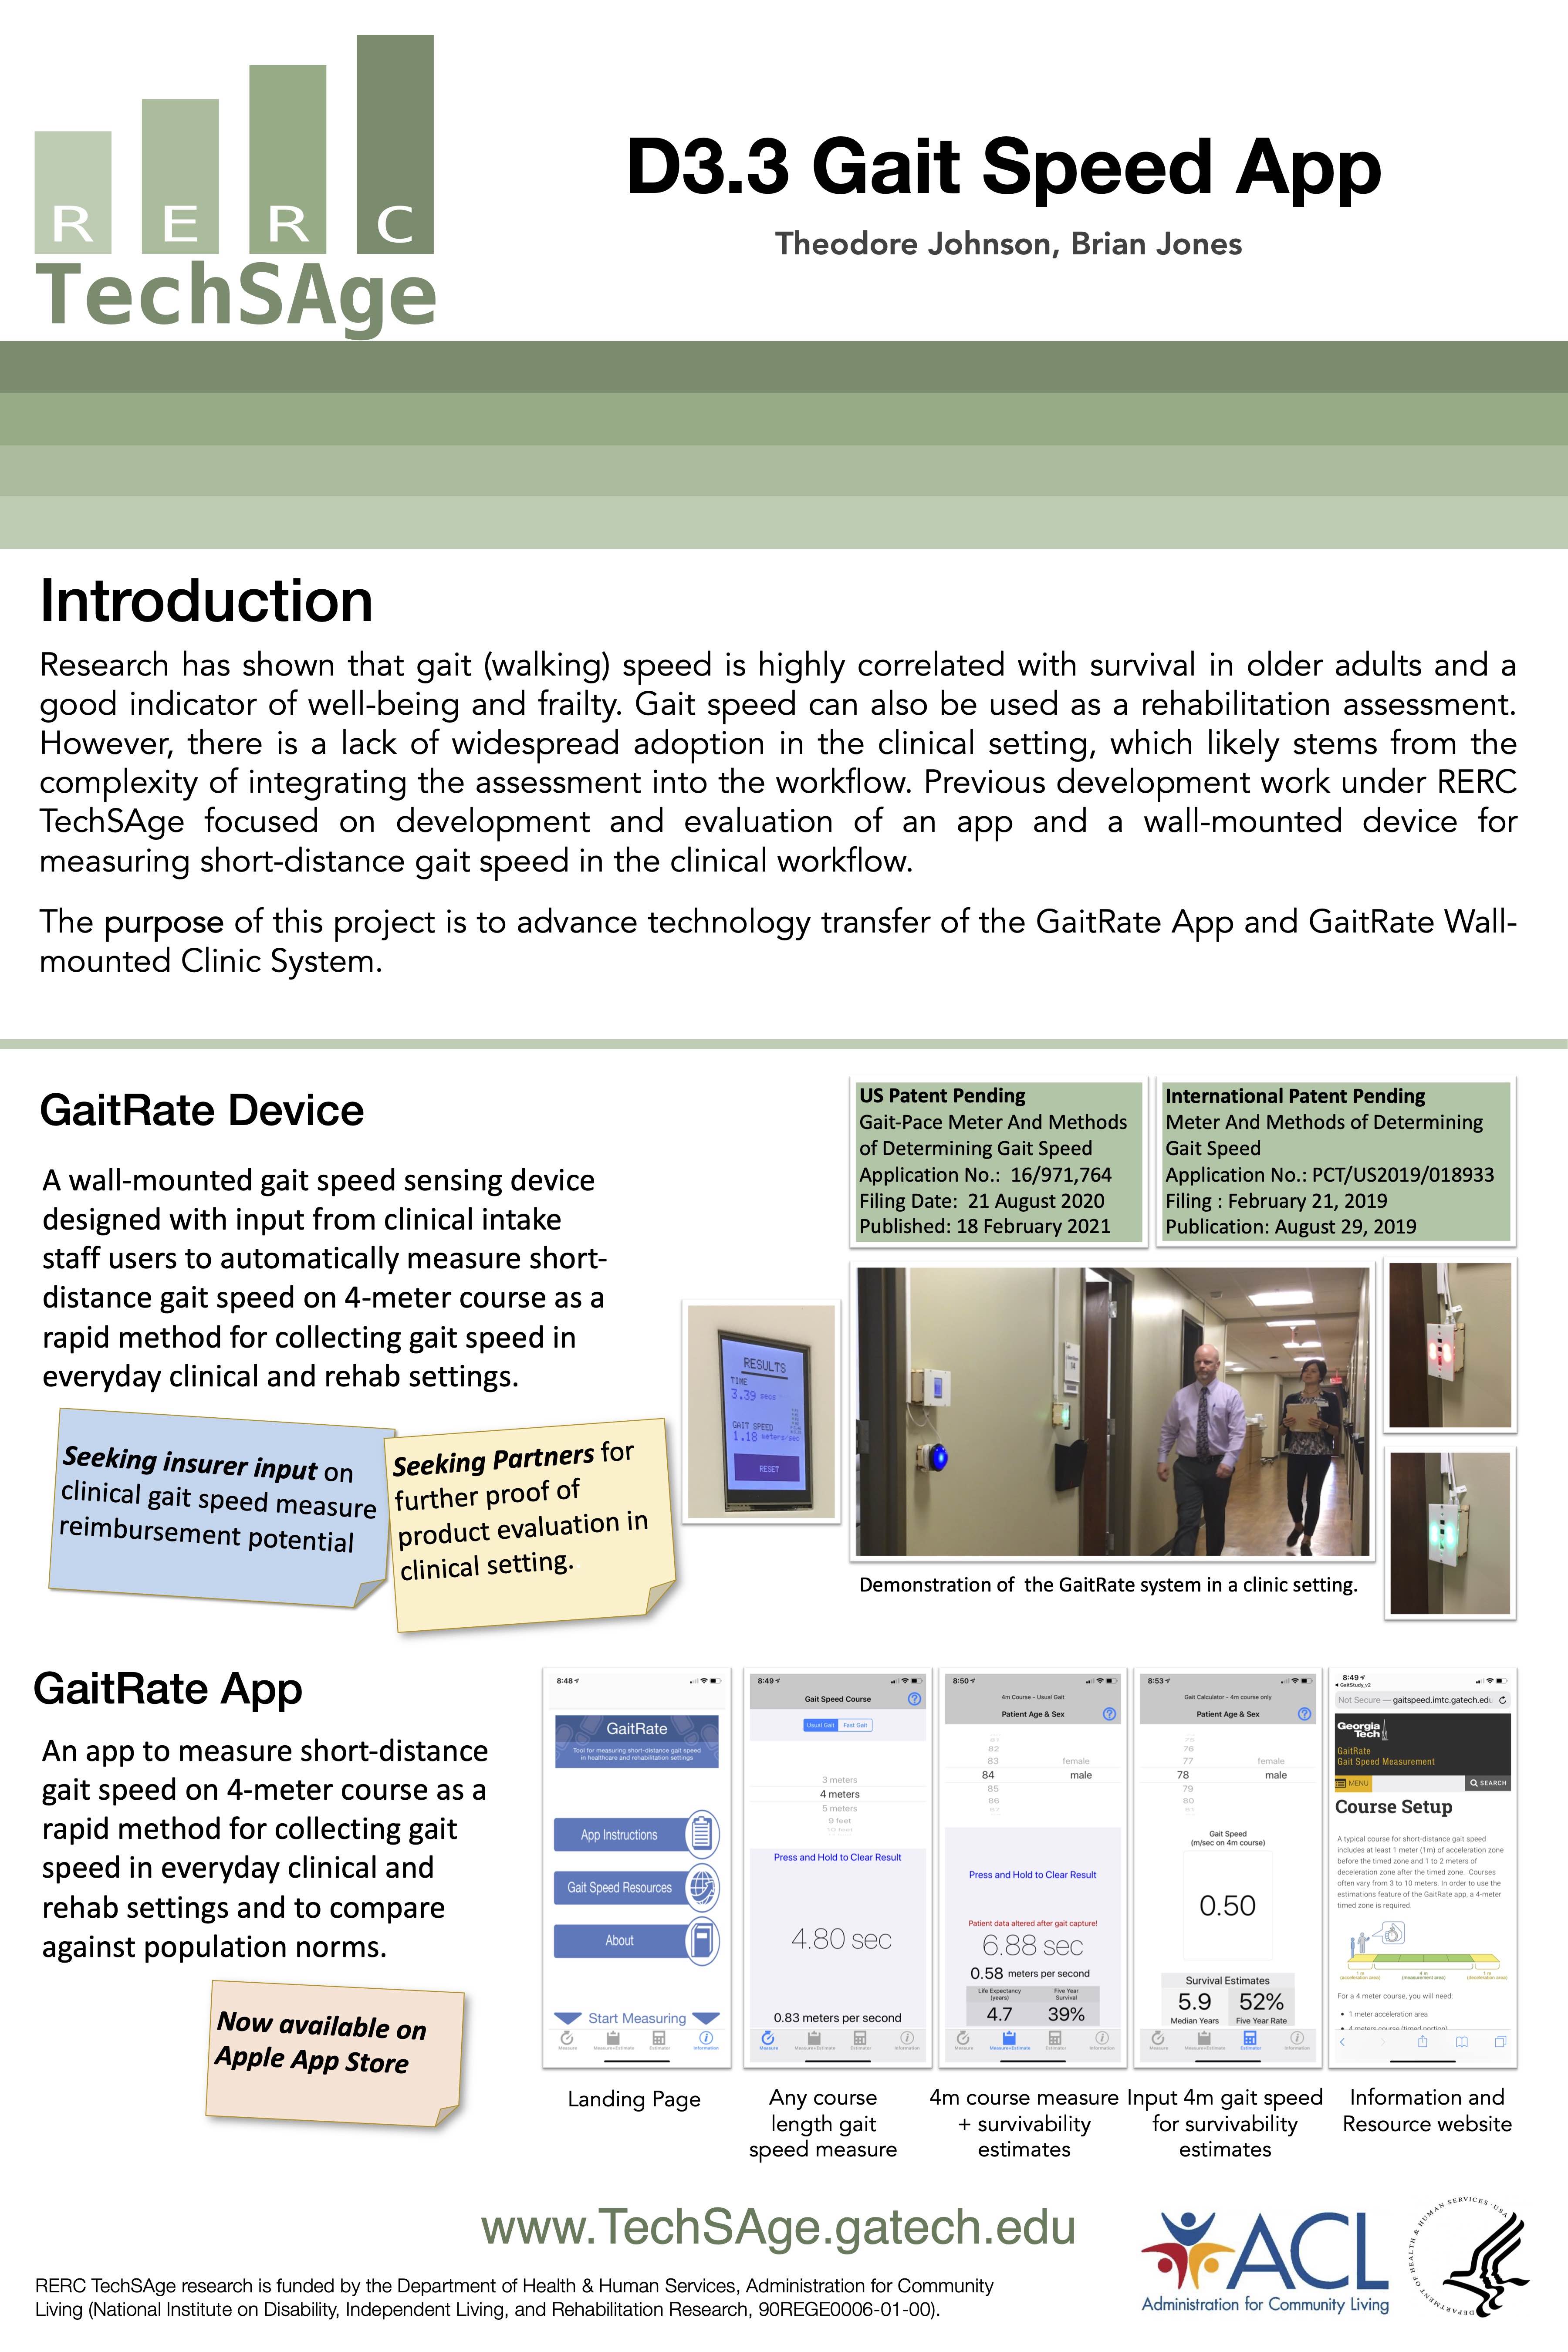 Screenshot of poster about the GaitRate app and GaitRate wall-mounted clinic system.